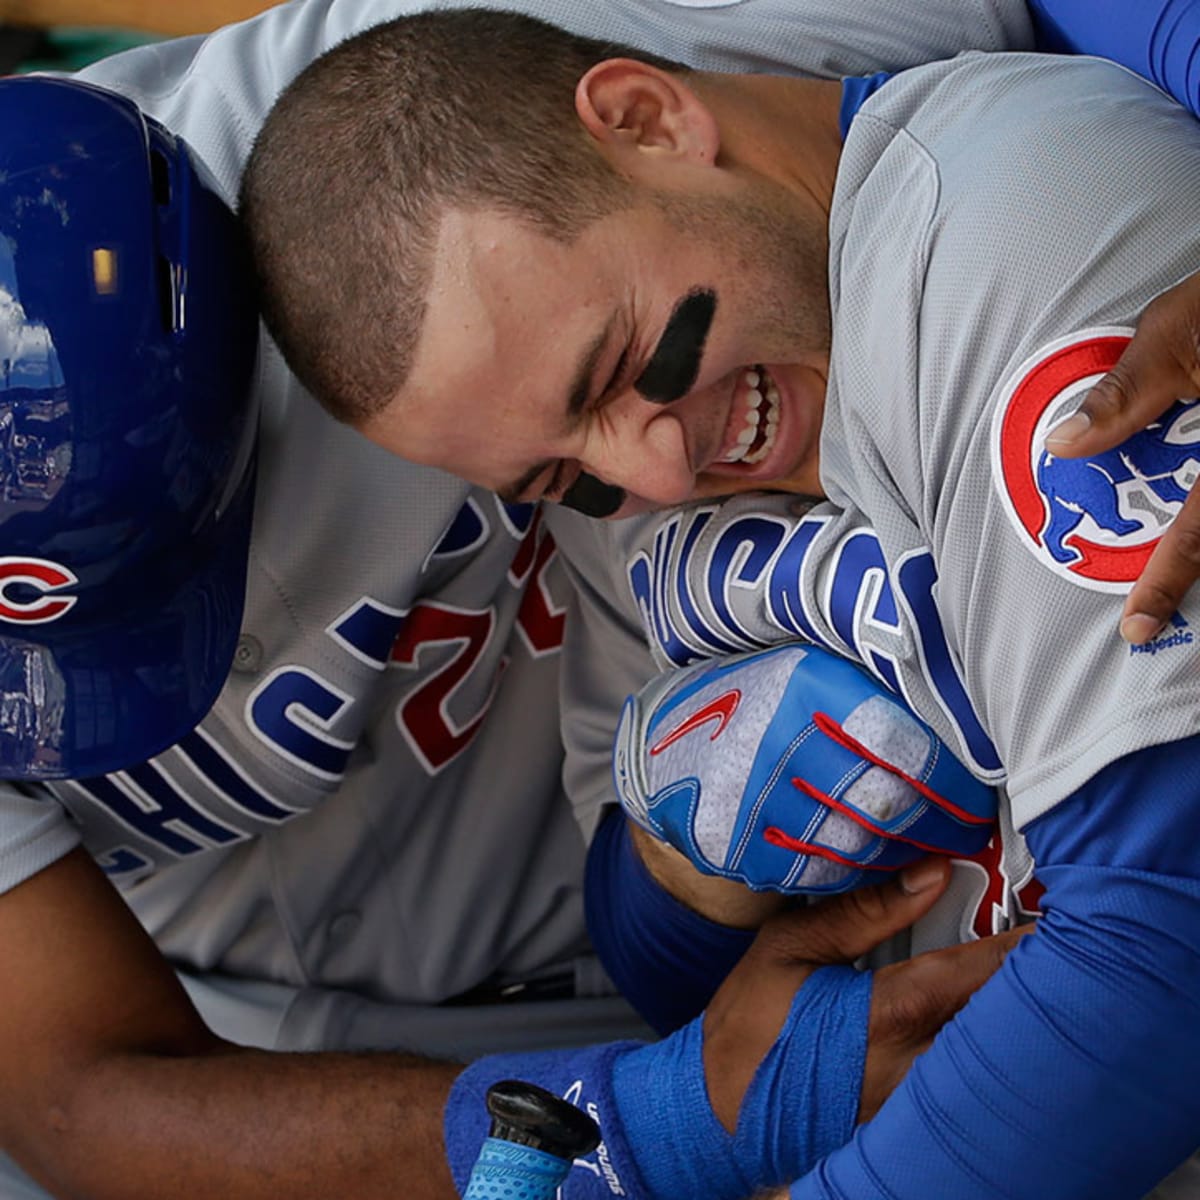 Anthony Rizzo, David Ross, and Kris Bryant by David Banks